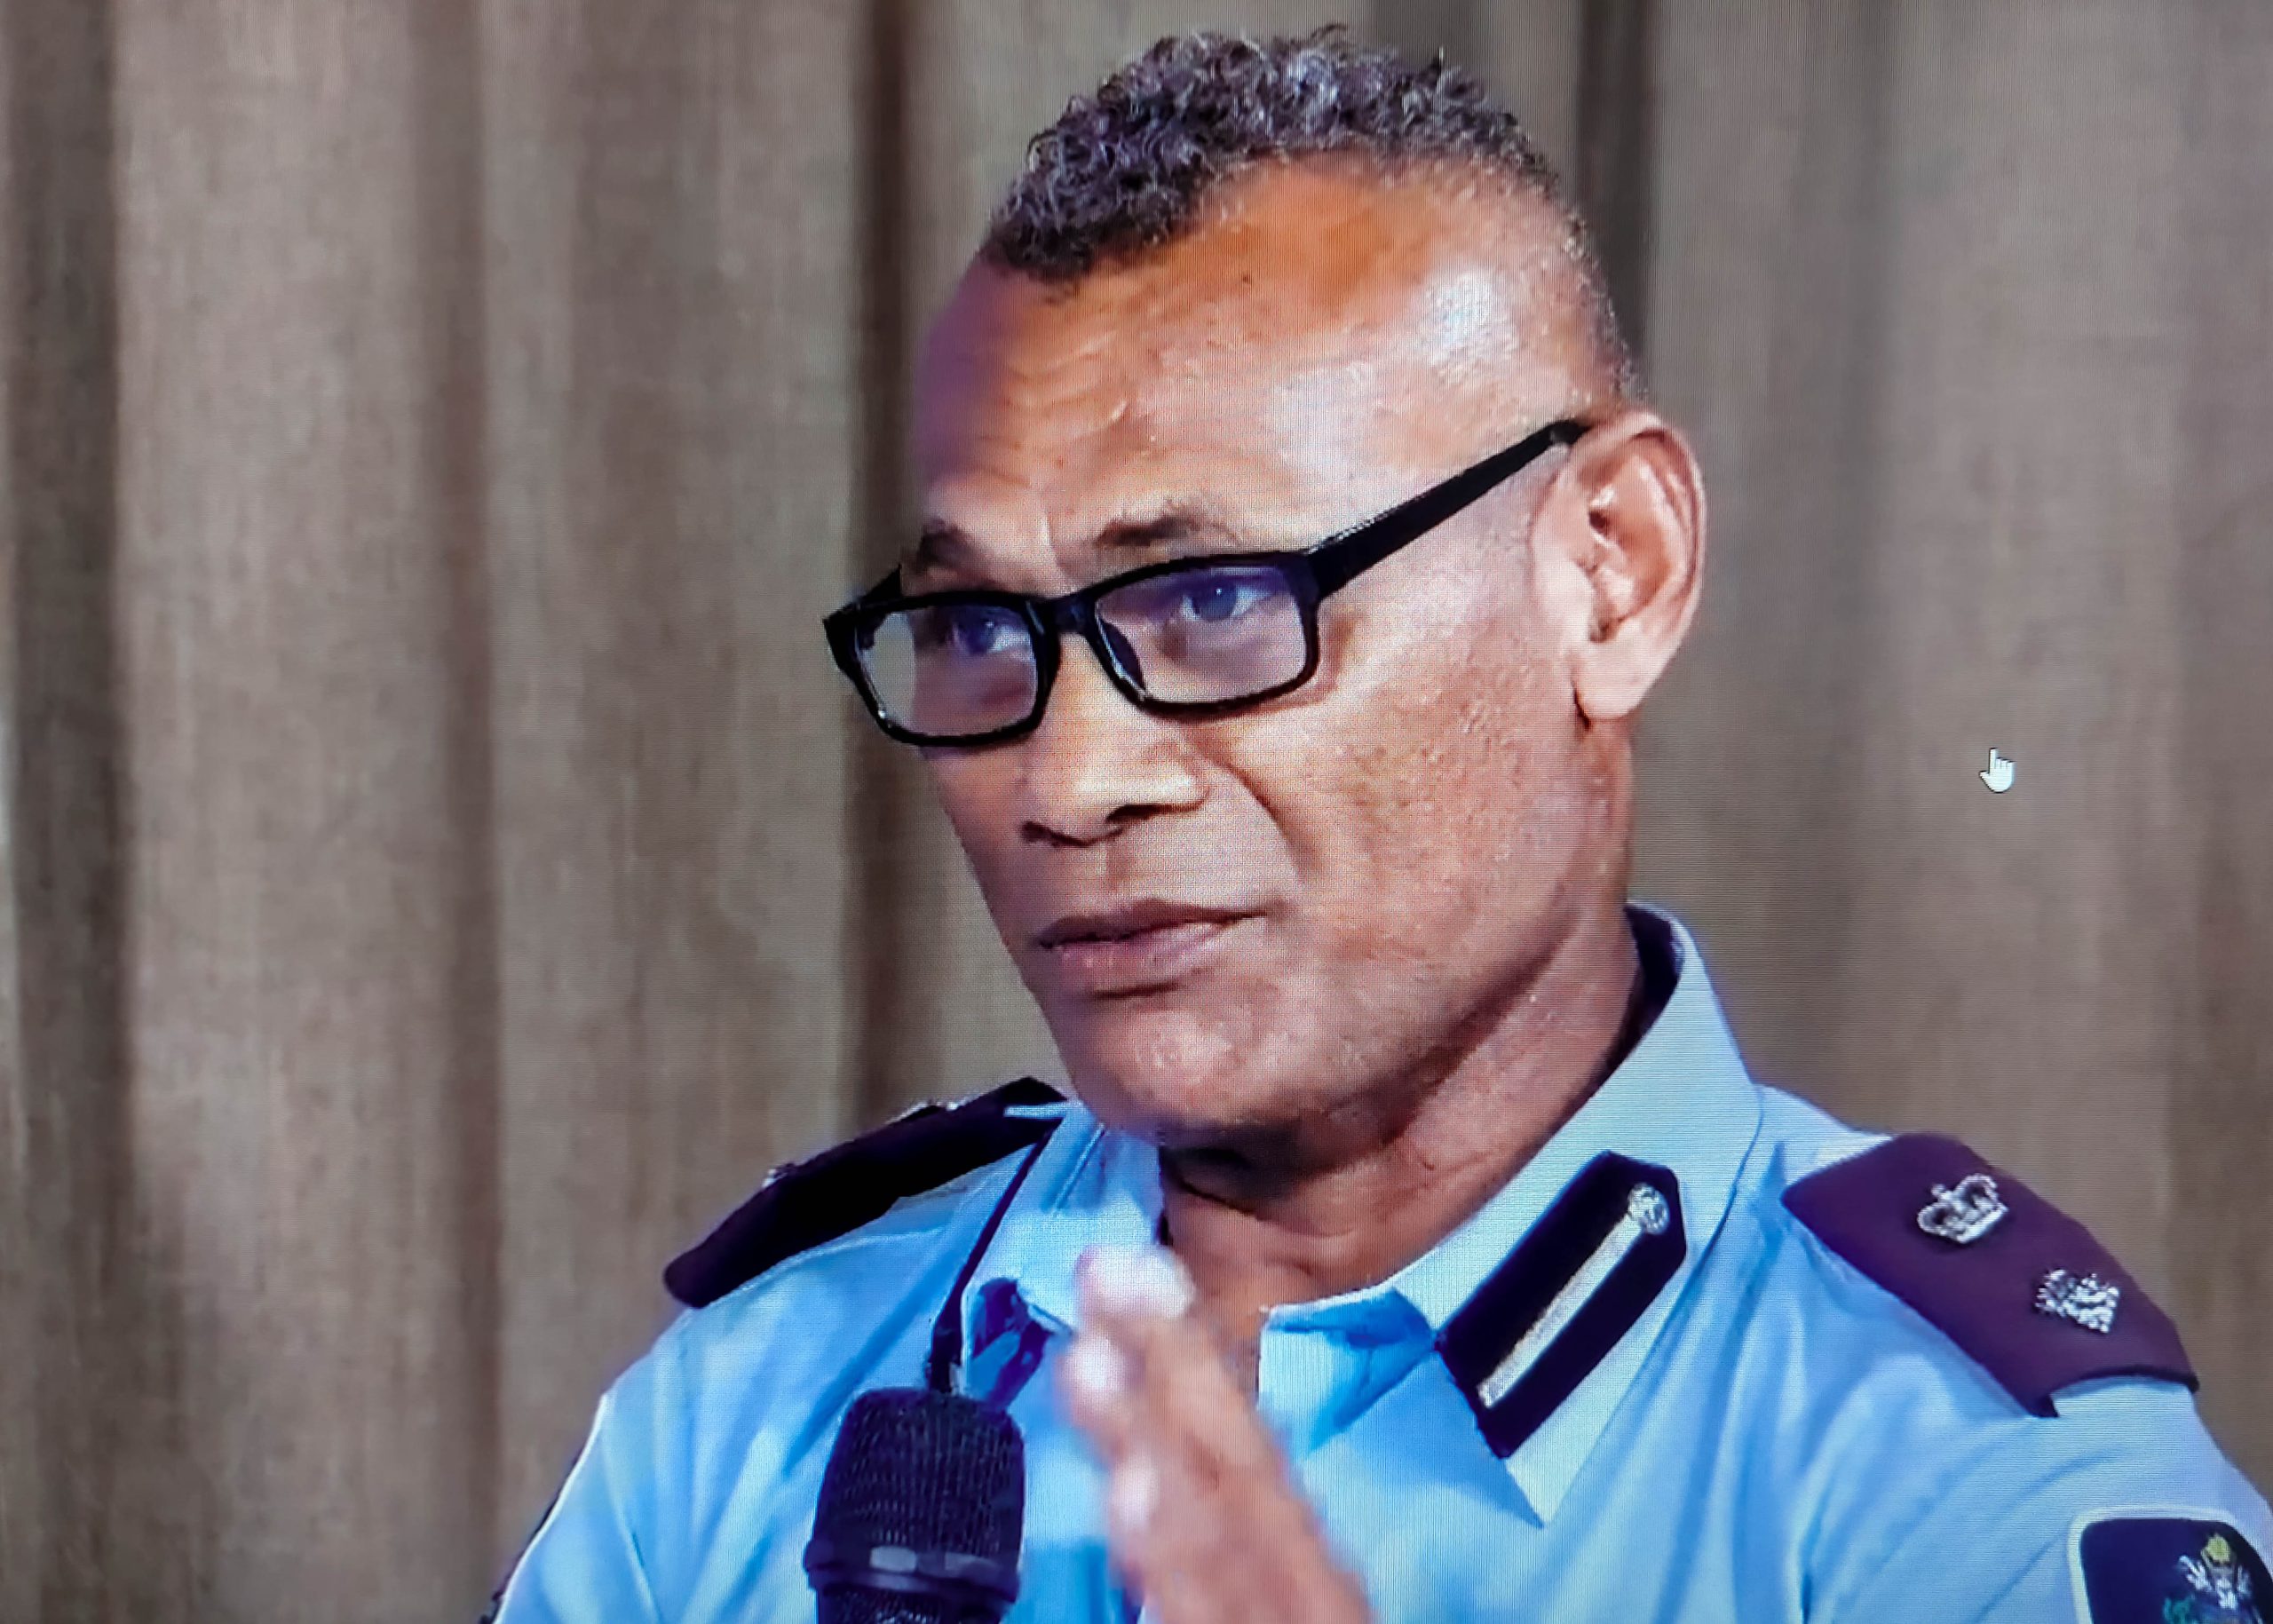 Traffic Police Director Assures Smooth Traffic Management in Honiara, during Games